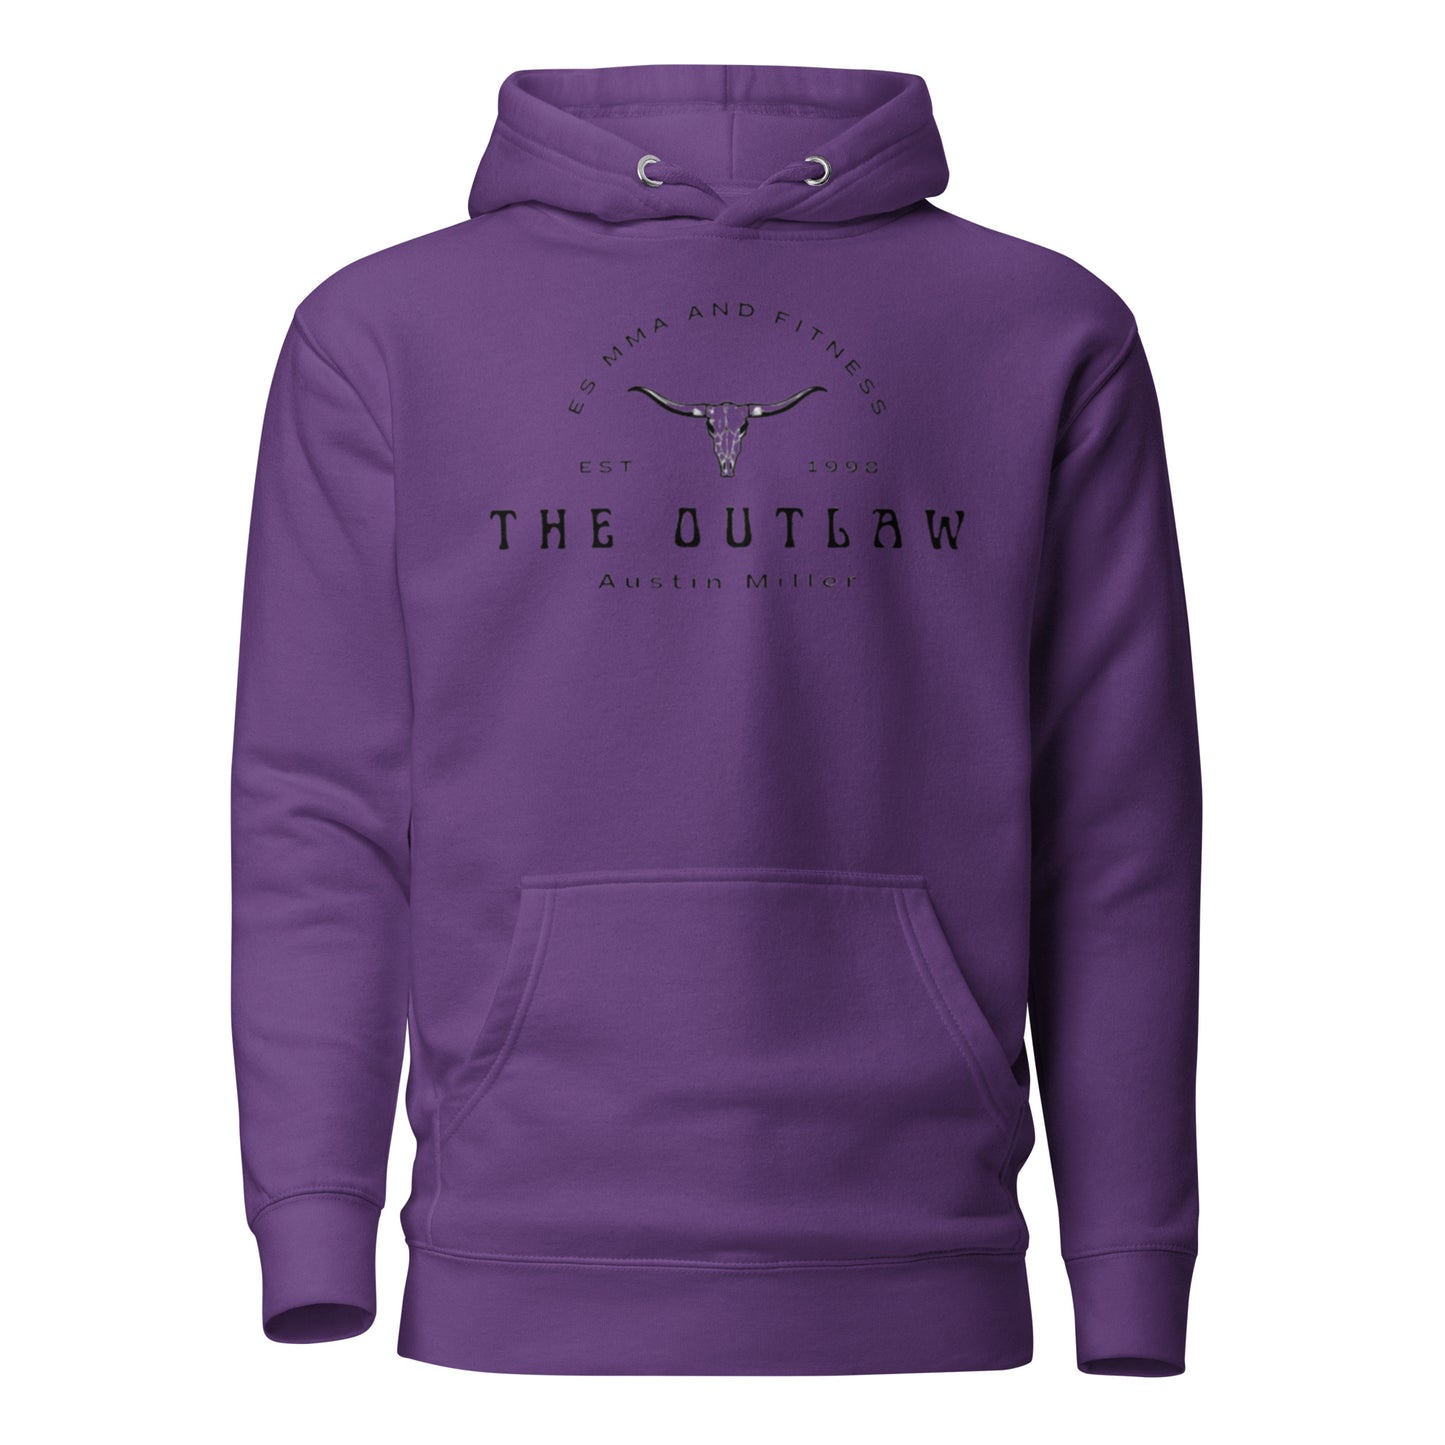 “The Outlaw” Collab